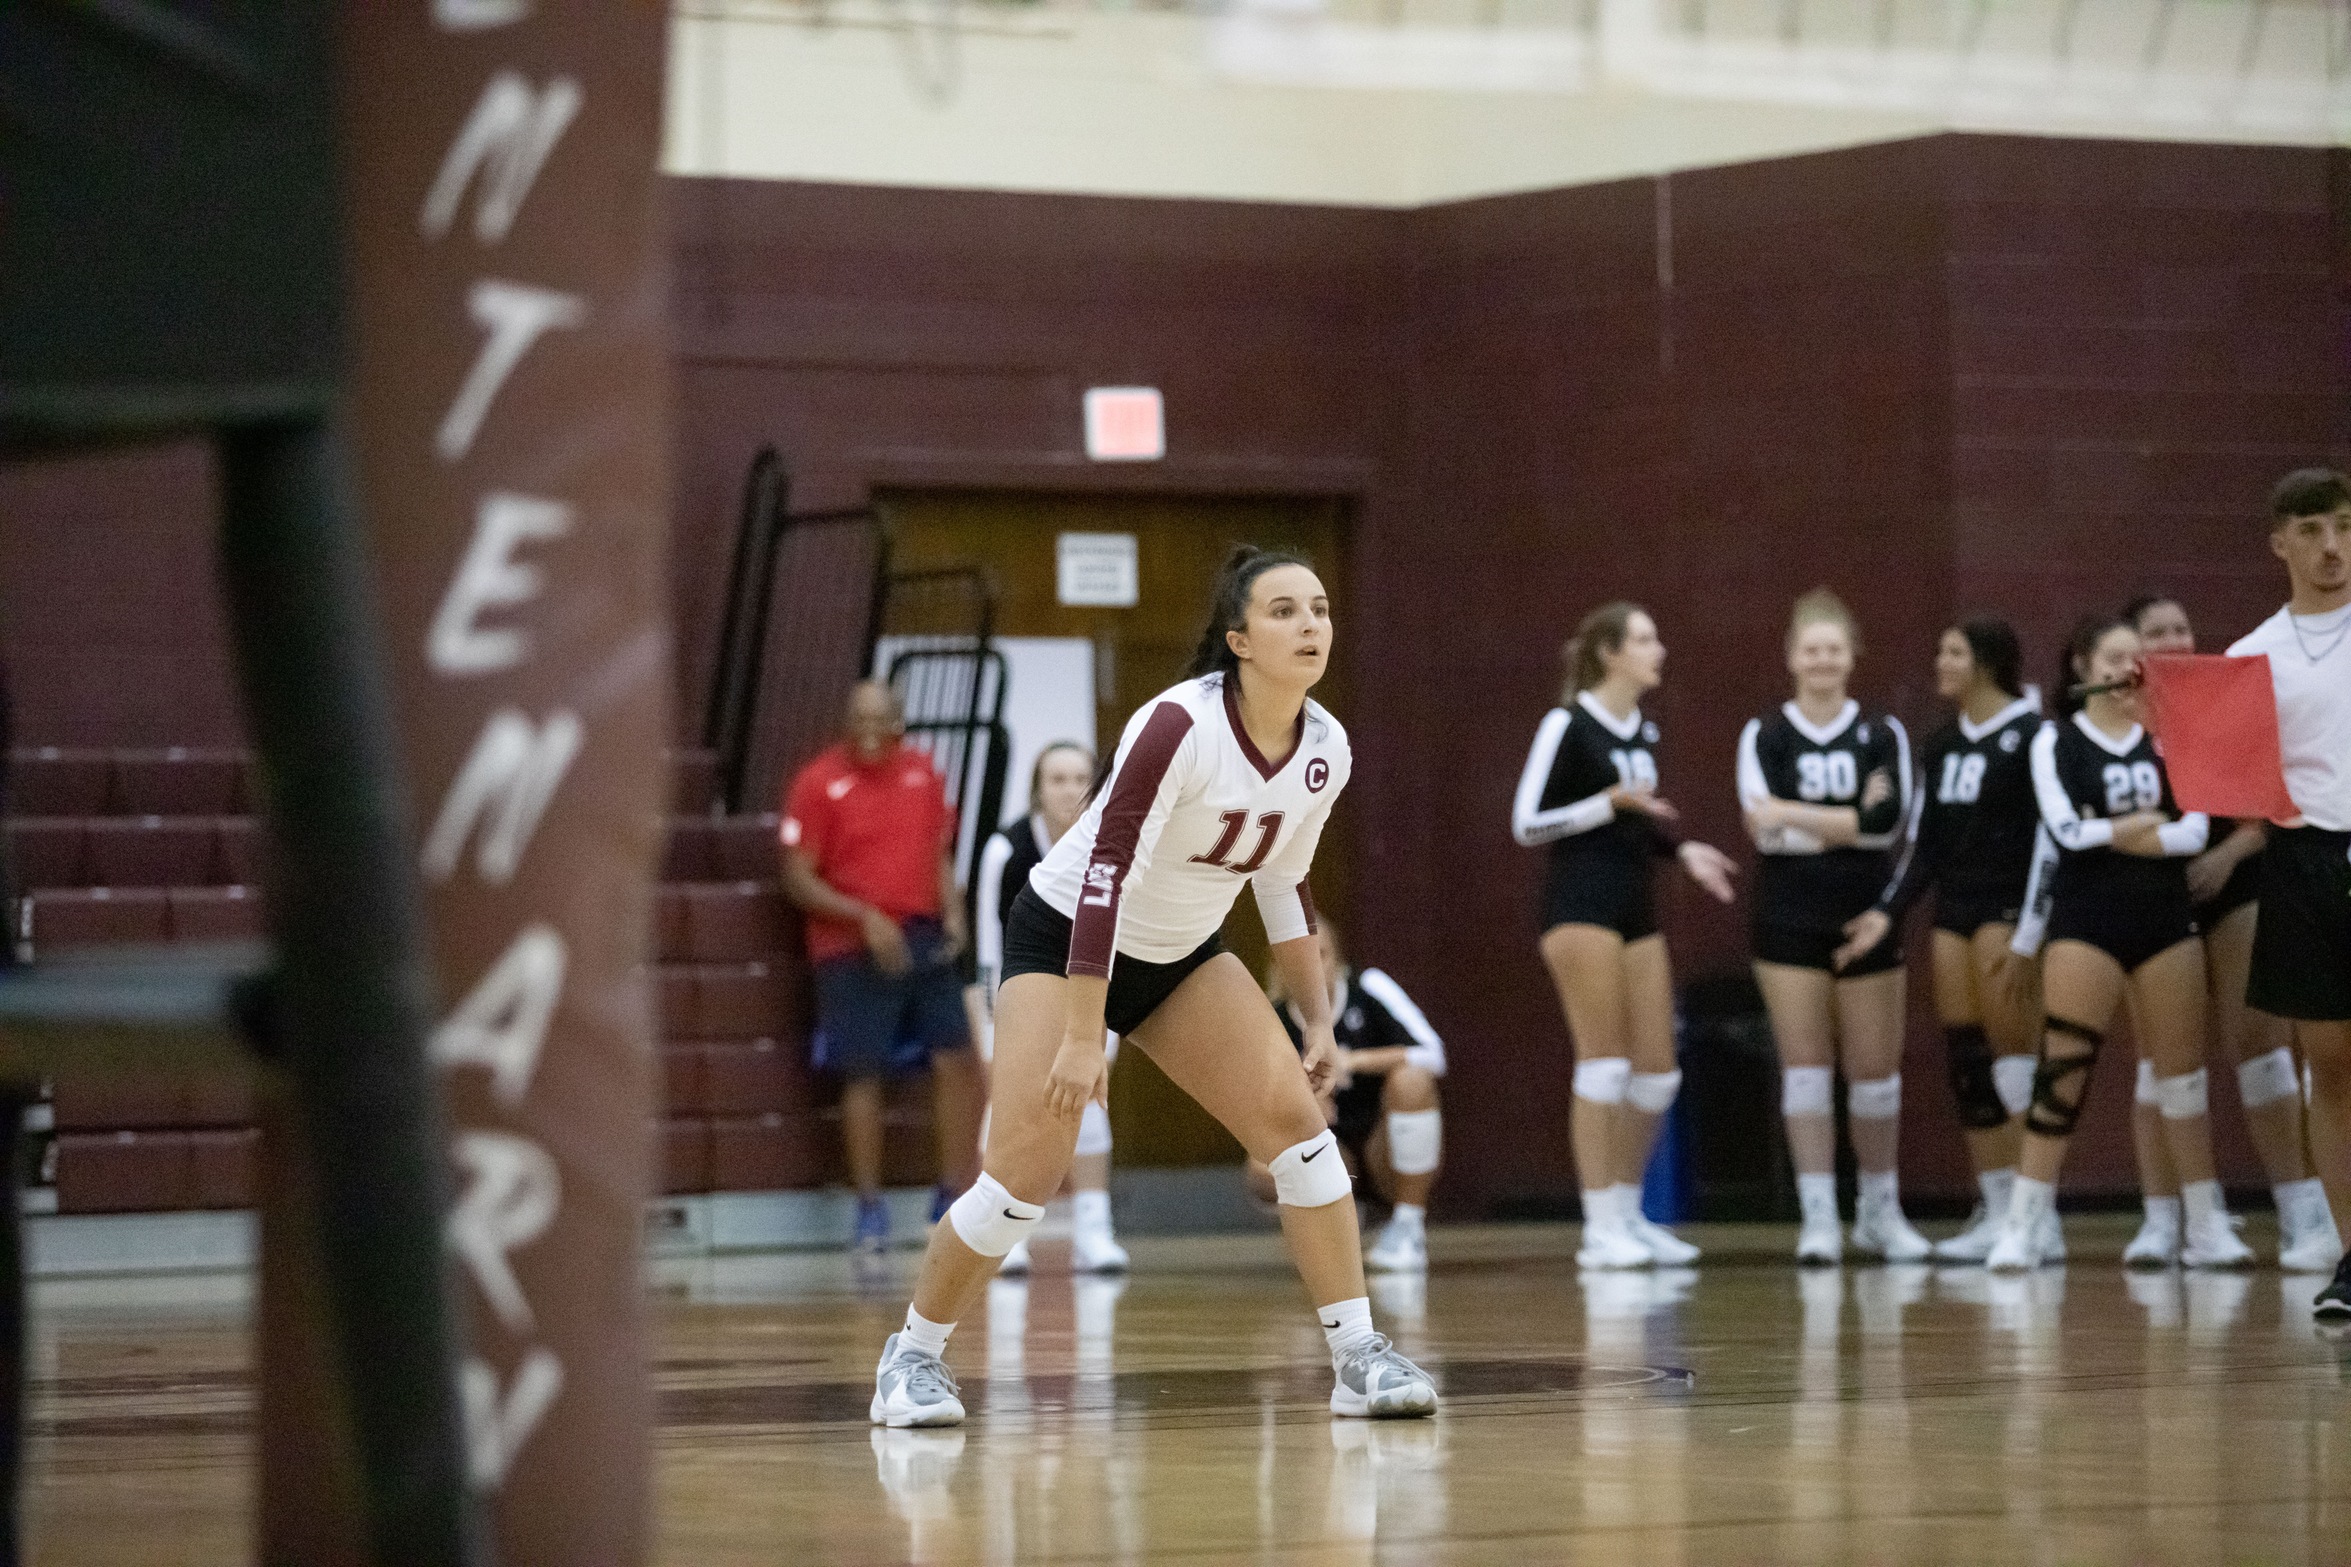 Jaycie Proctor and the Ladies will be in San Antonio this weekend for three SCAC matches.